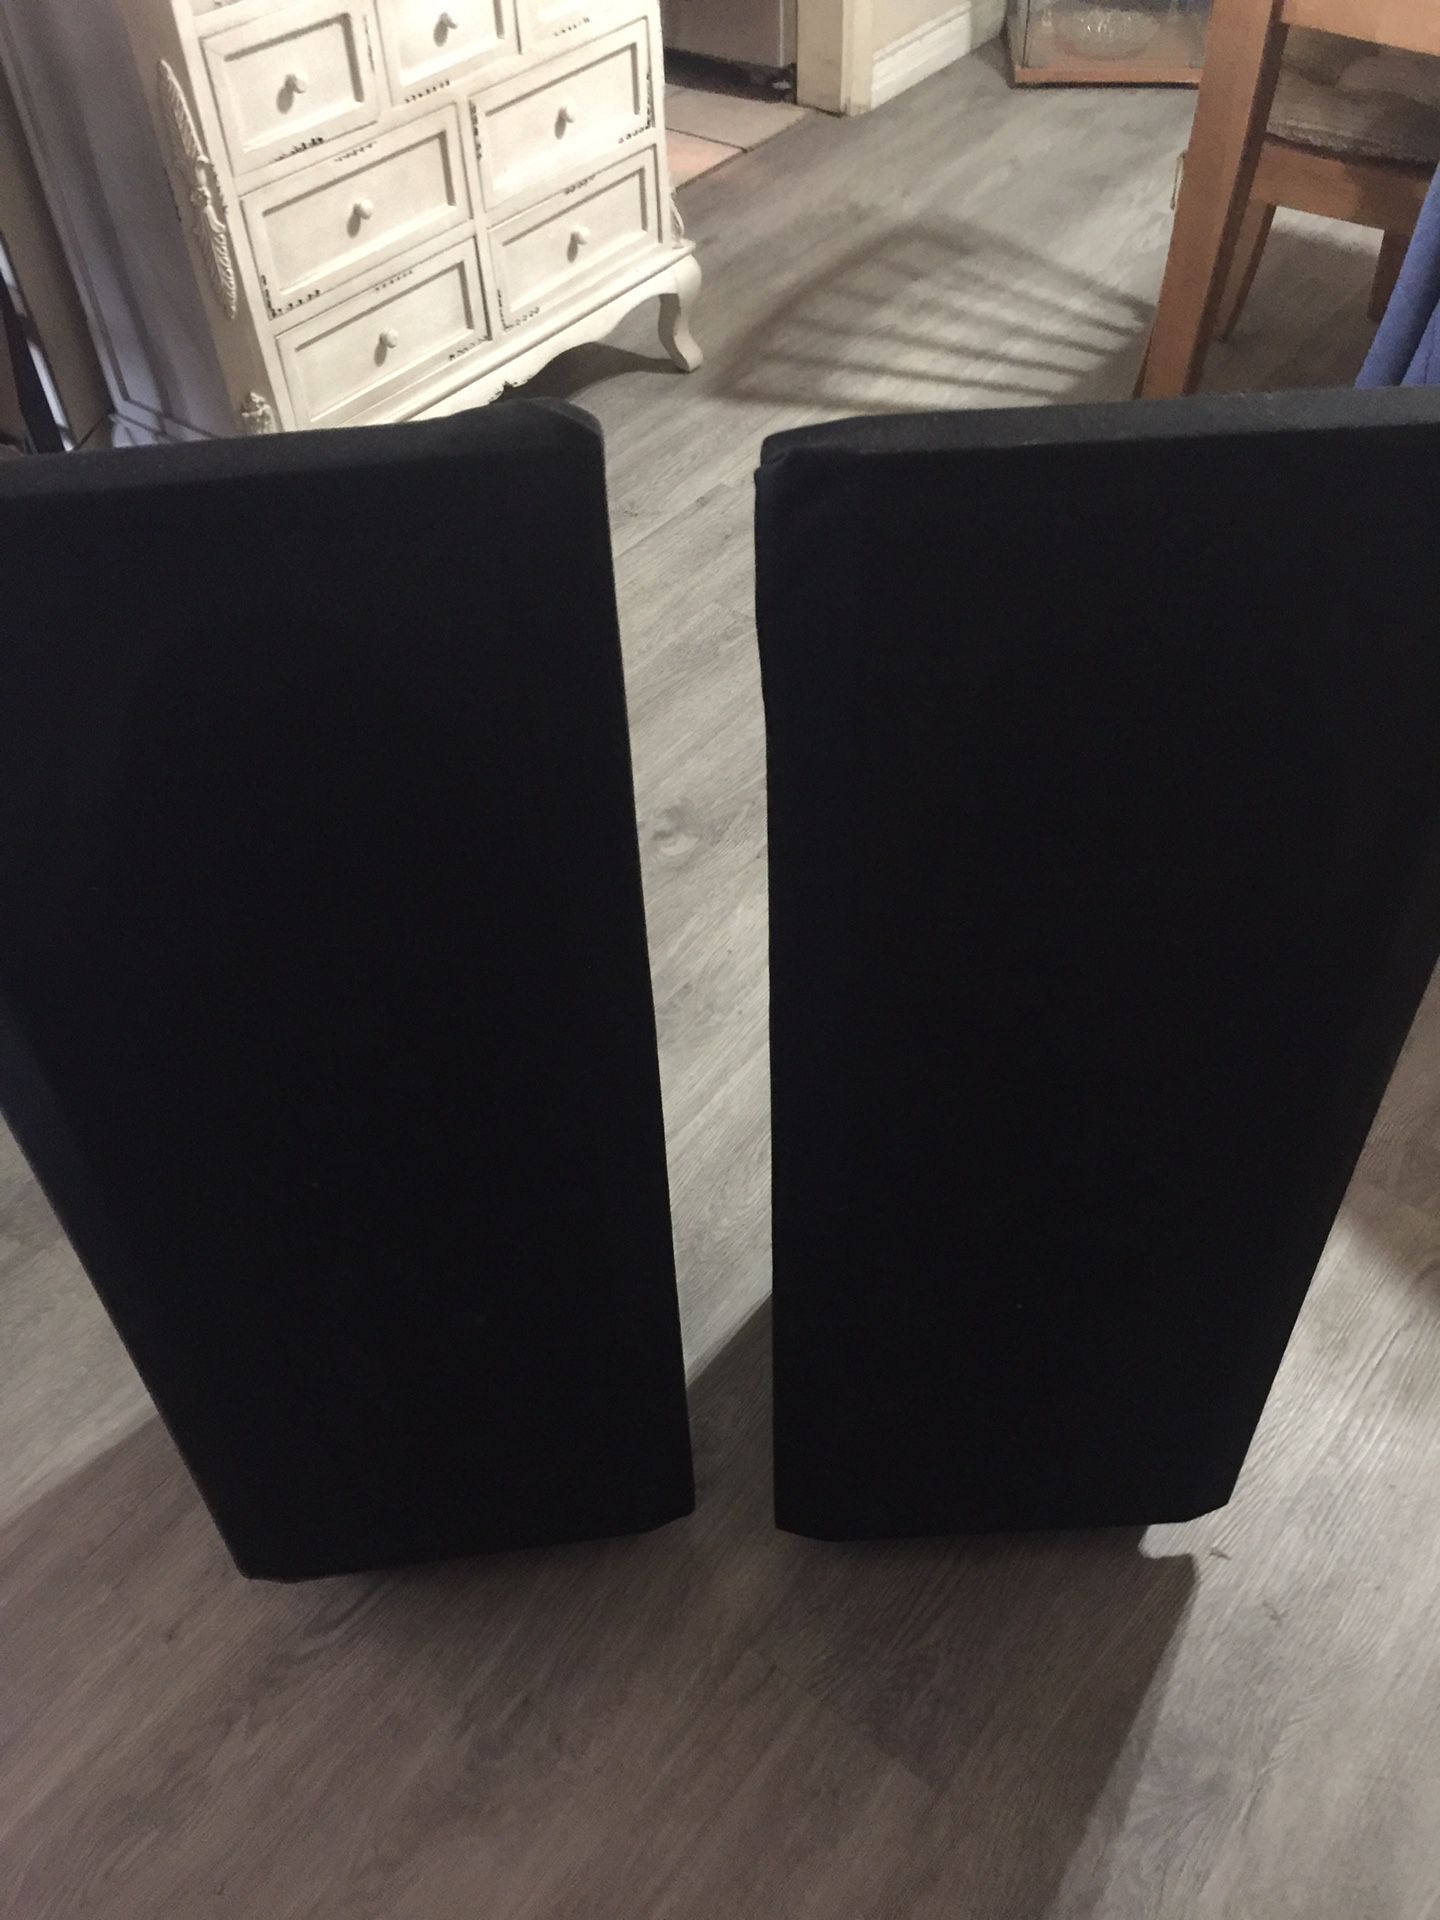 Dahlquist DQ8 Phased Array Stereo Speakers